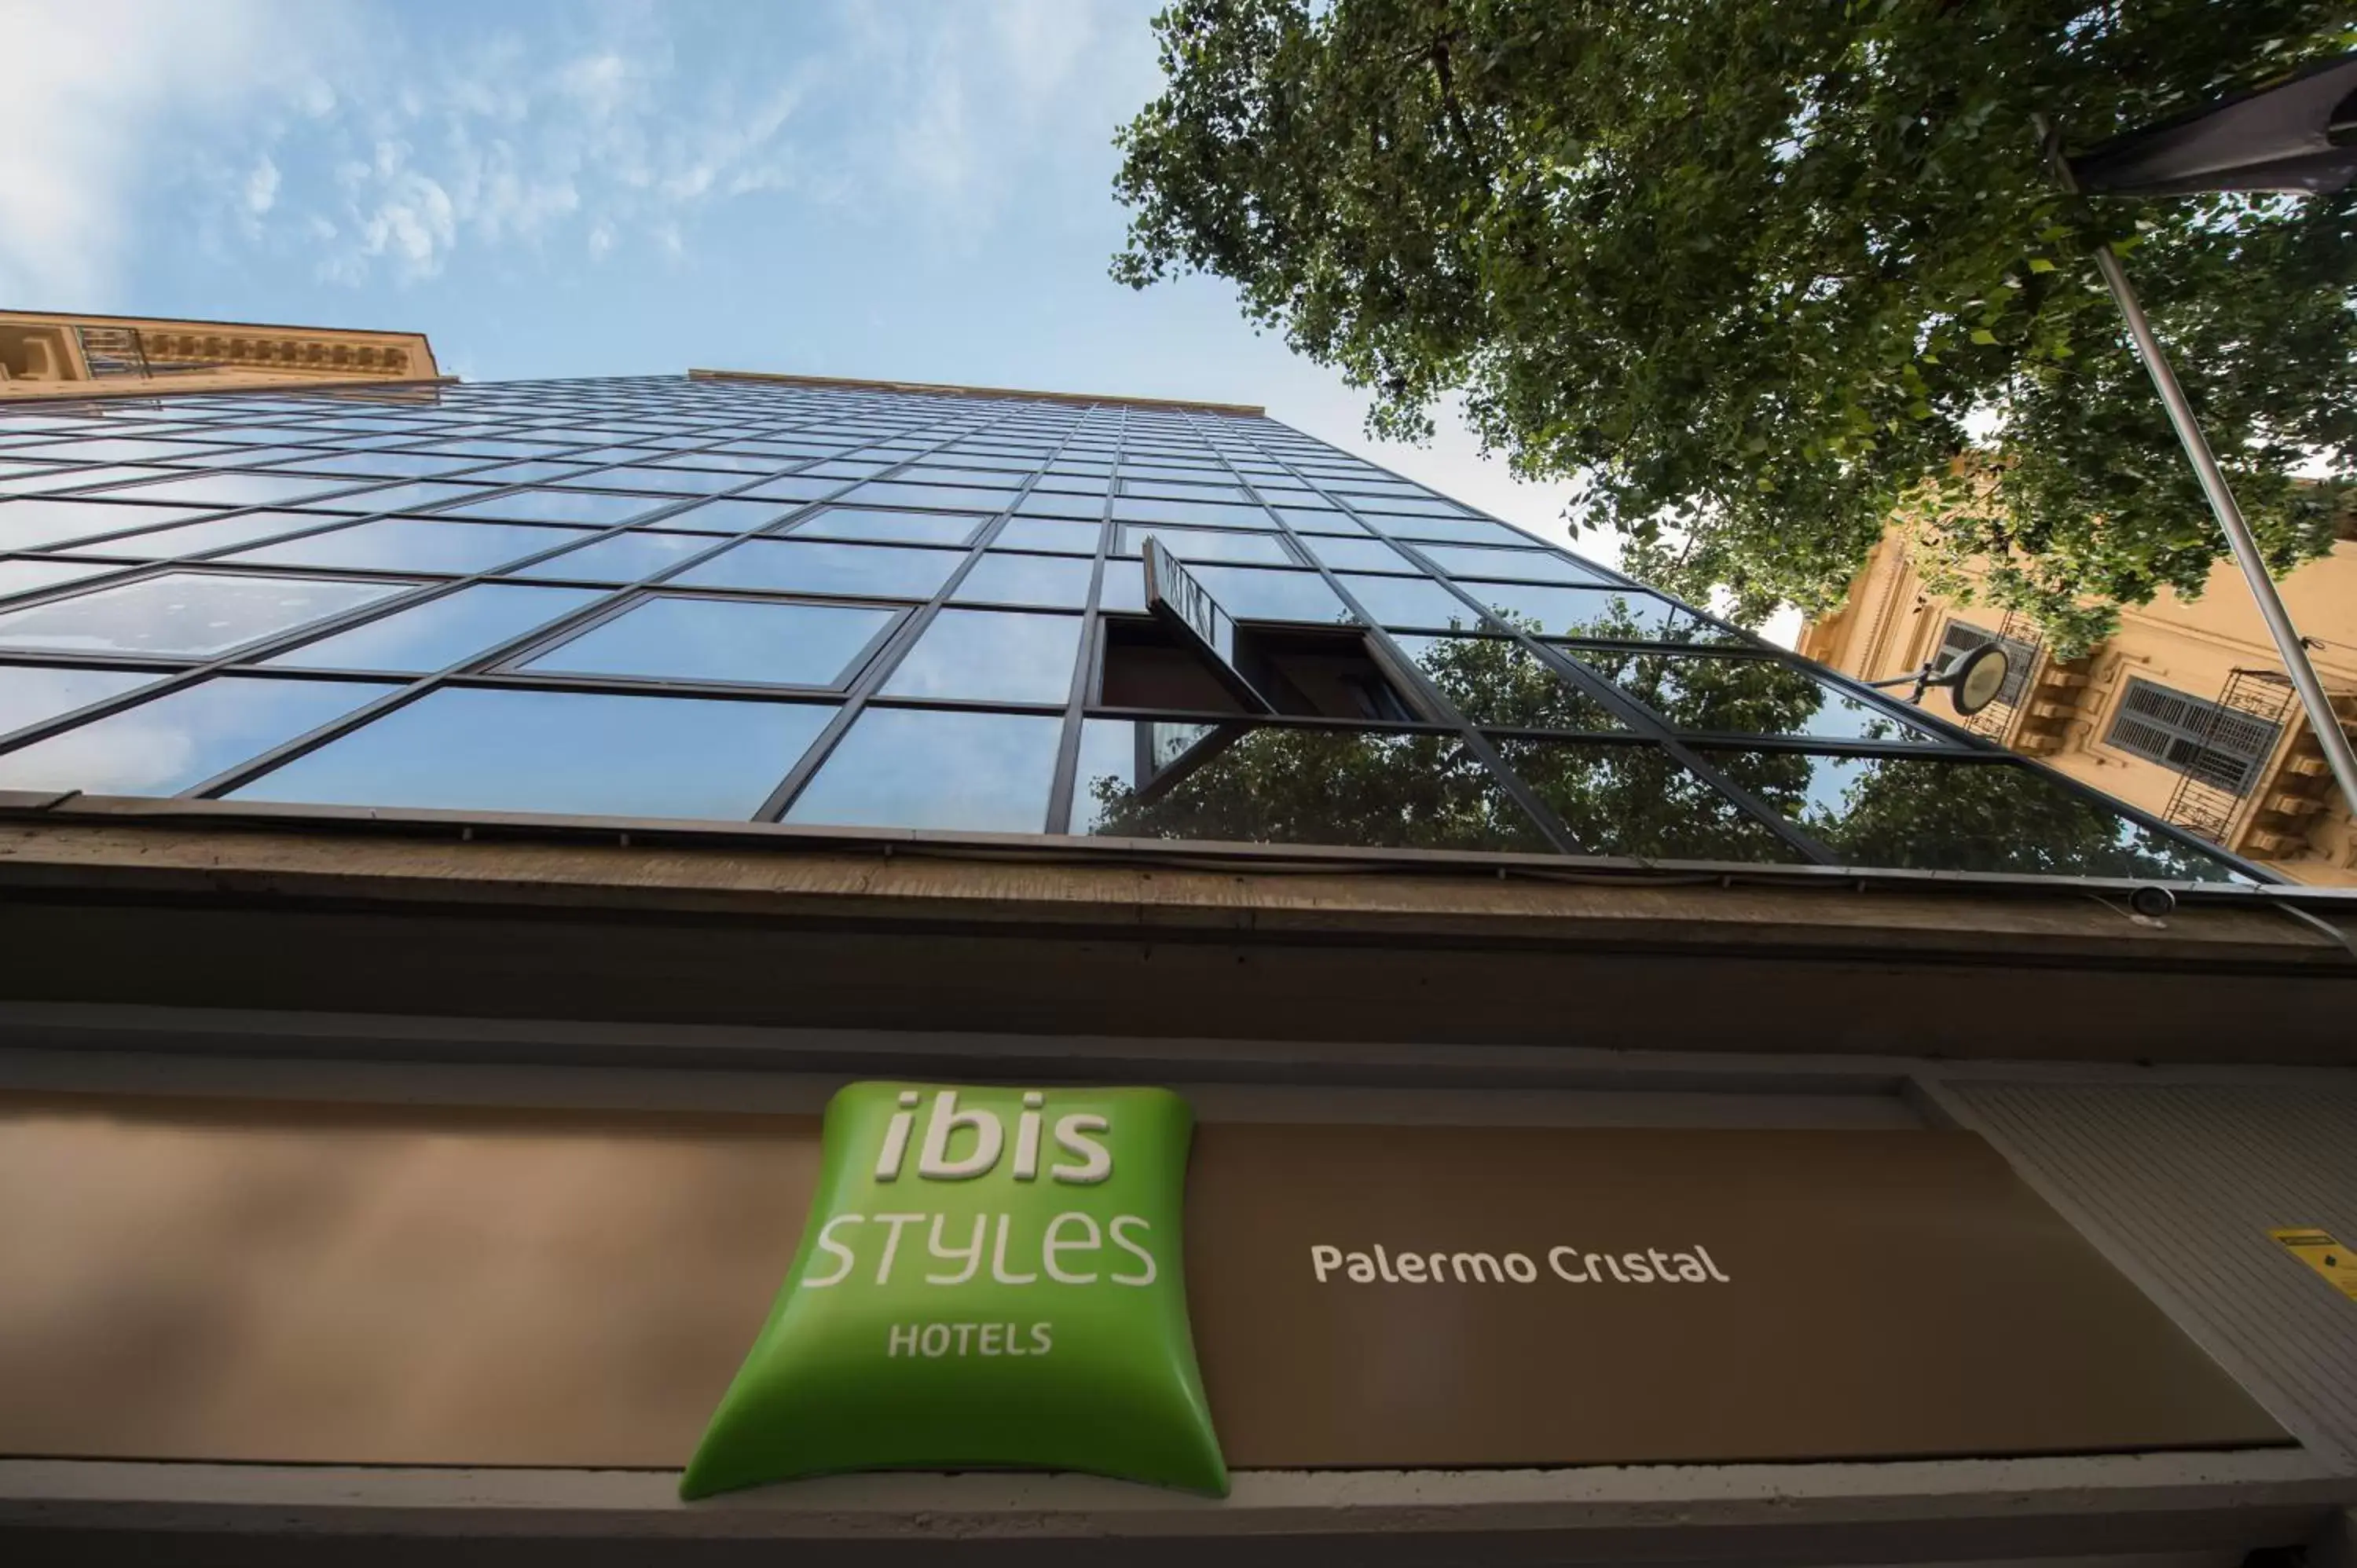 Property logo or sign in Ibis Styles Palermo Cristal